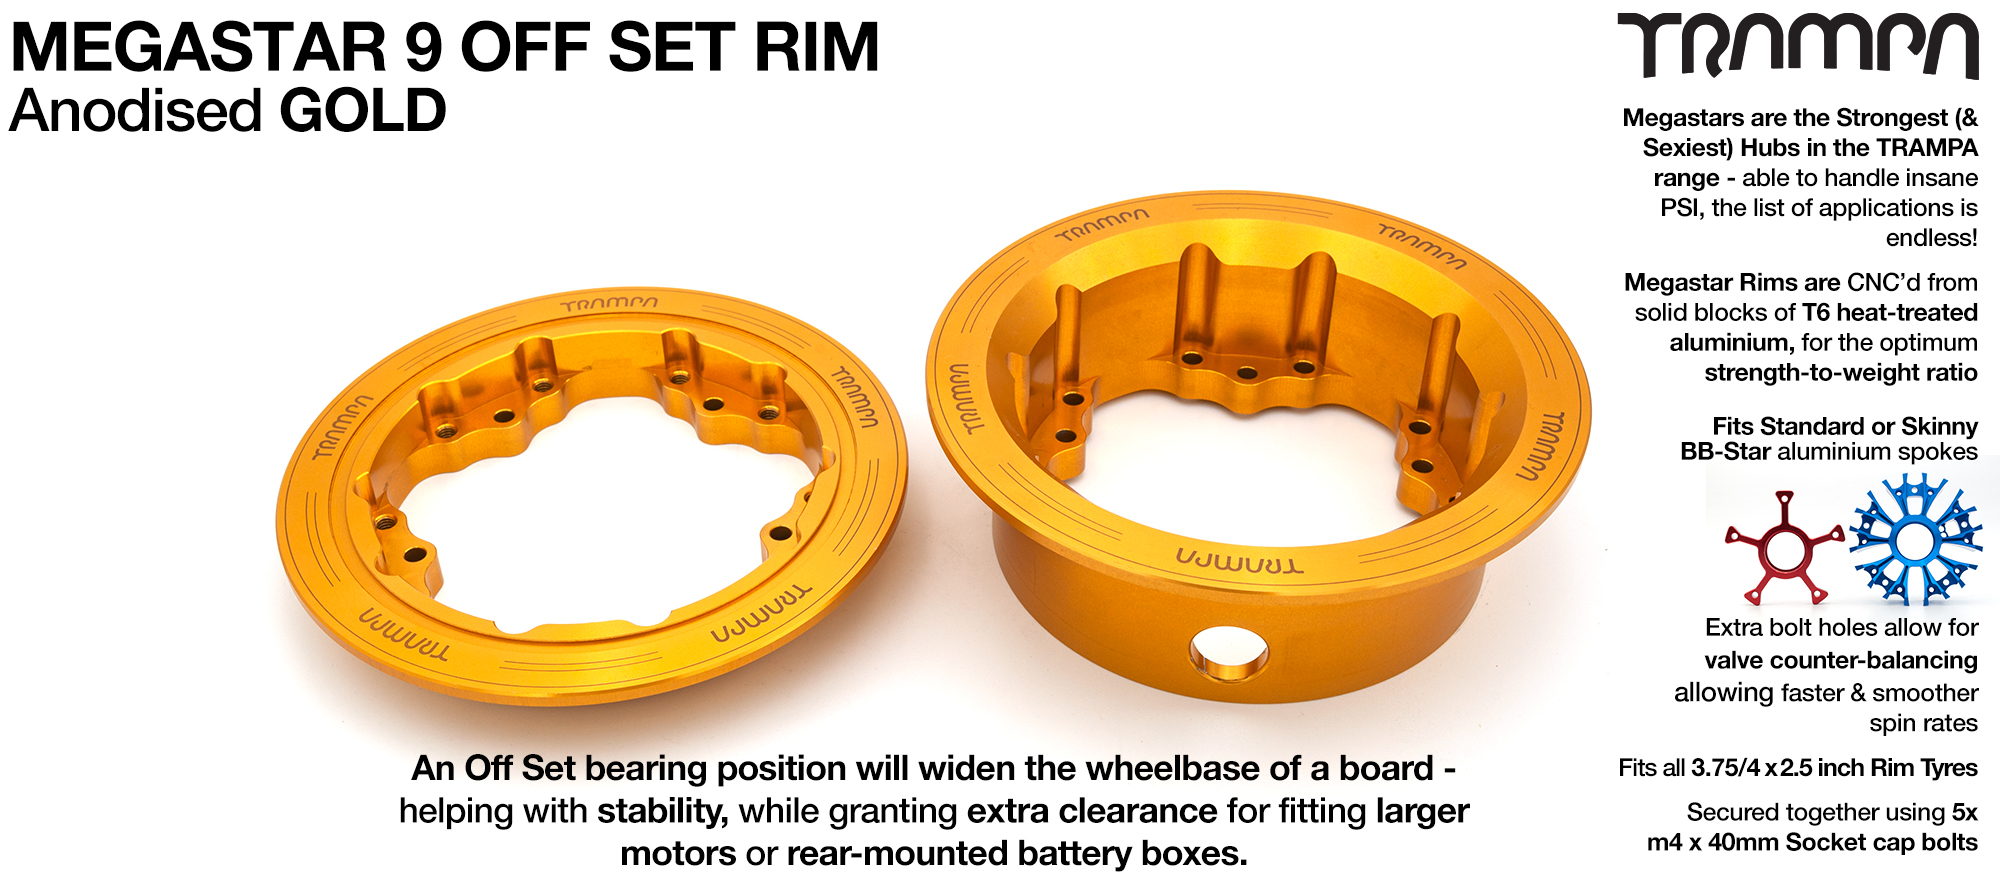 MEGASTAR 9 Rims Measure 3.75/4x 2.5 Inch & the bearings are positioned OFF-SET & accept 3.75 & 4 Inch Rim Tyres - GOLD